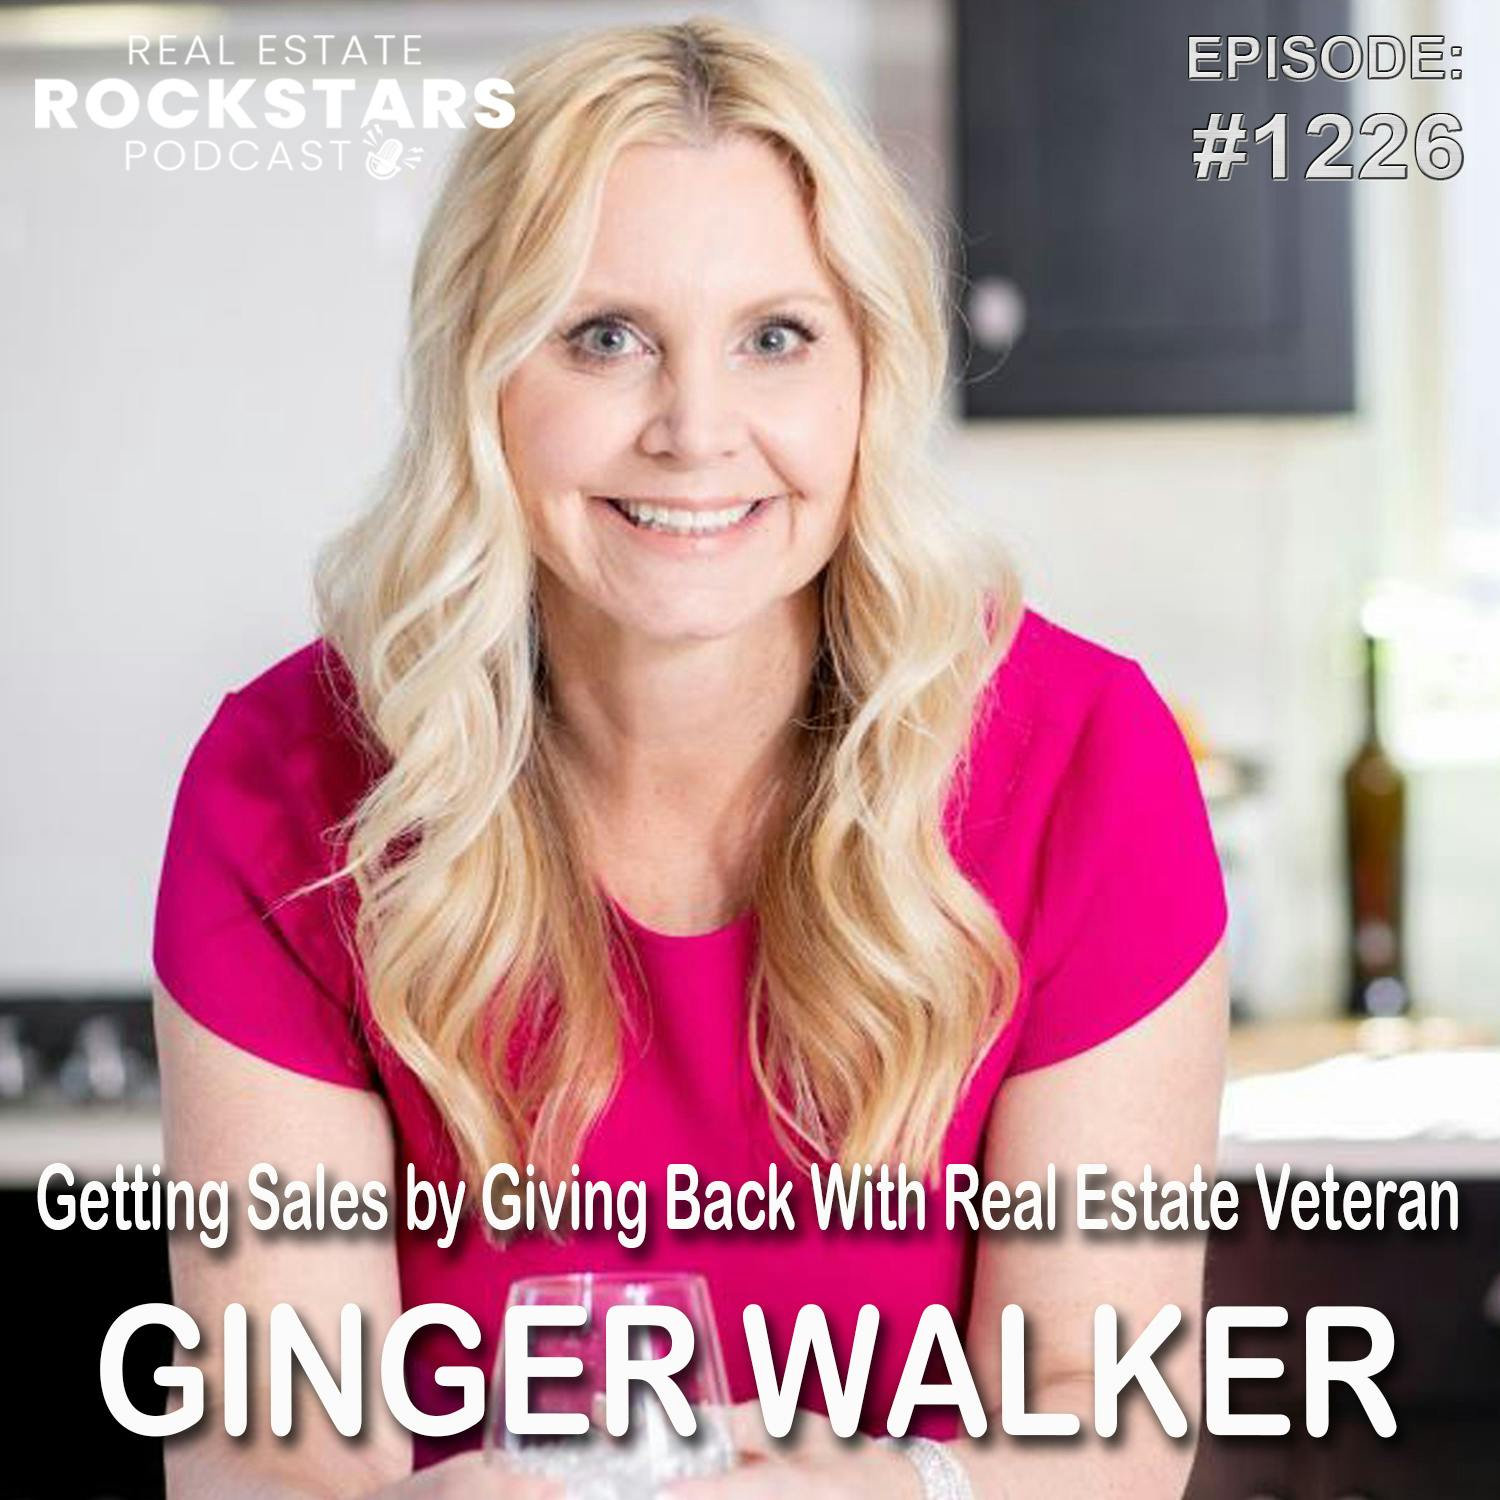 1226: Getting Sales by Giving Back With Real Estate Veteran Ginger Walker